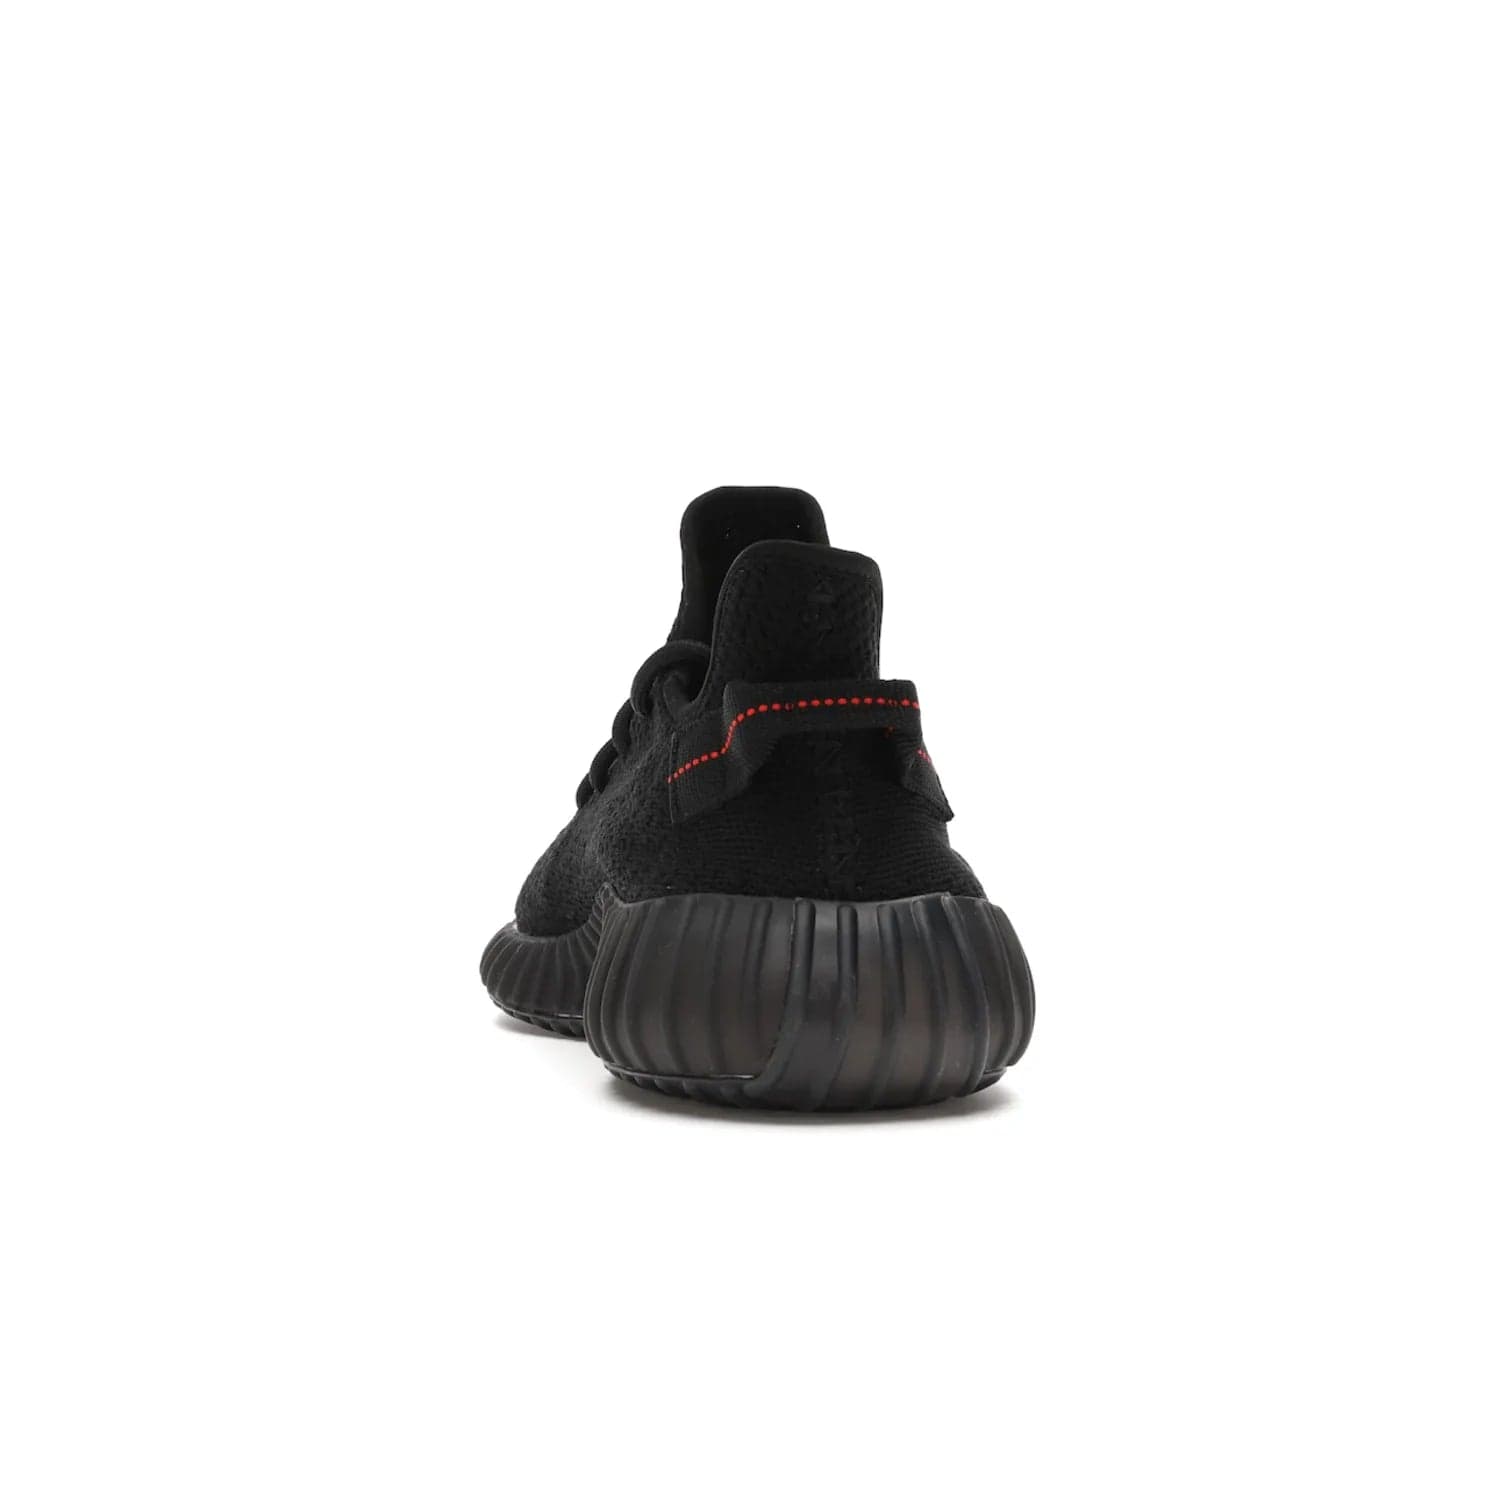 adidas Yeezy Boost 350 V2 Black Red (2017/2020) - Image 27 - Only at www.BallersClubKickz.com - Adidas Yeezy Boost 350 V2 Black Red: a classic colorway featuring black Primeknit upper, BOOST cushioning system, and iconic "SPLY-350" text. Released in 2017 for a retail price of $220.